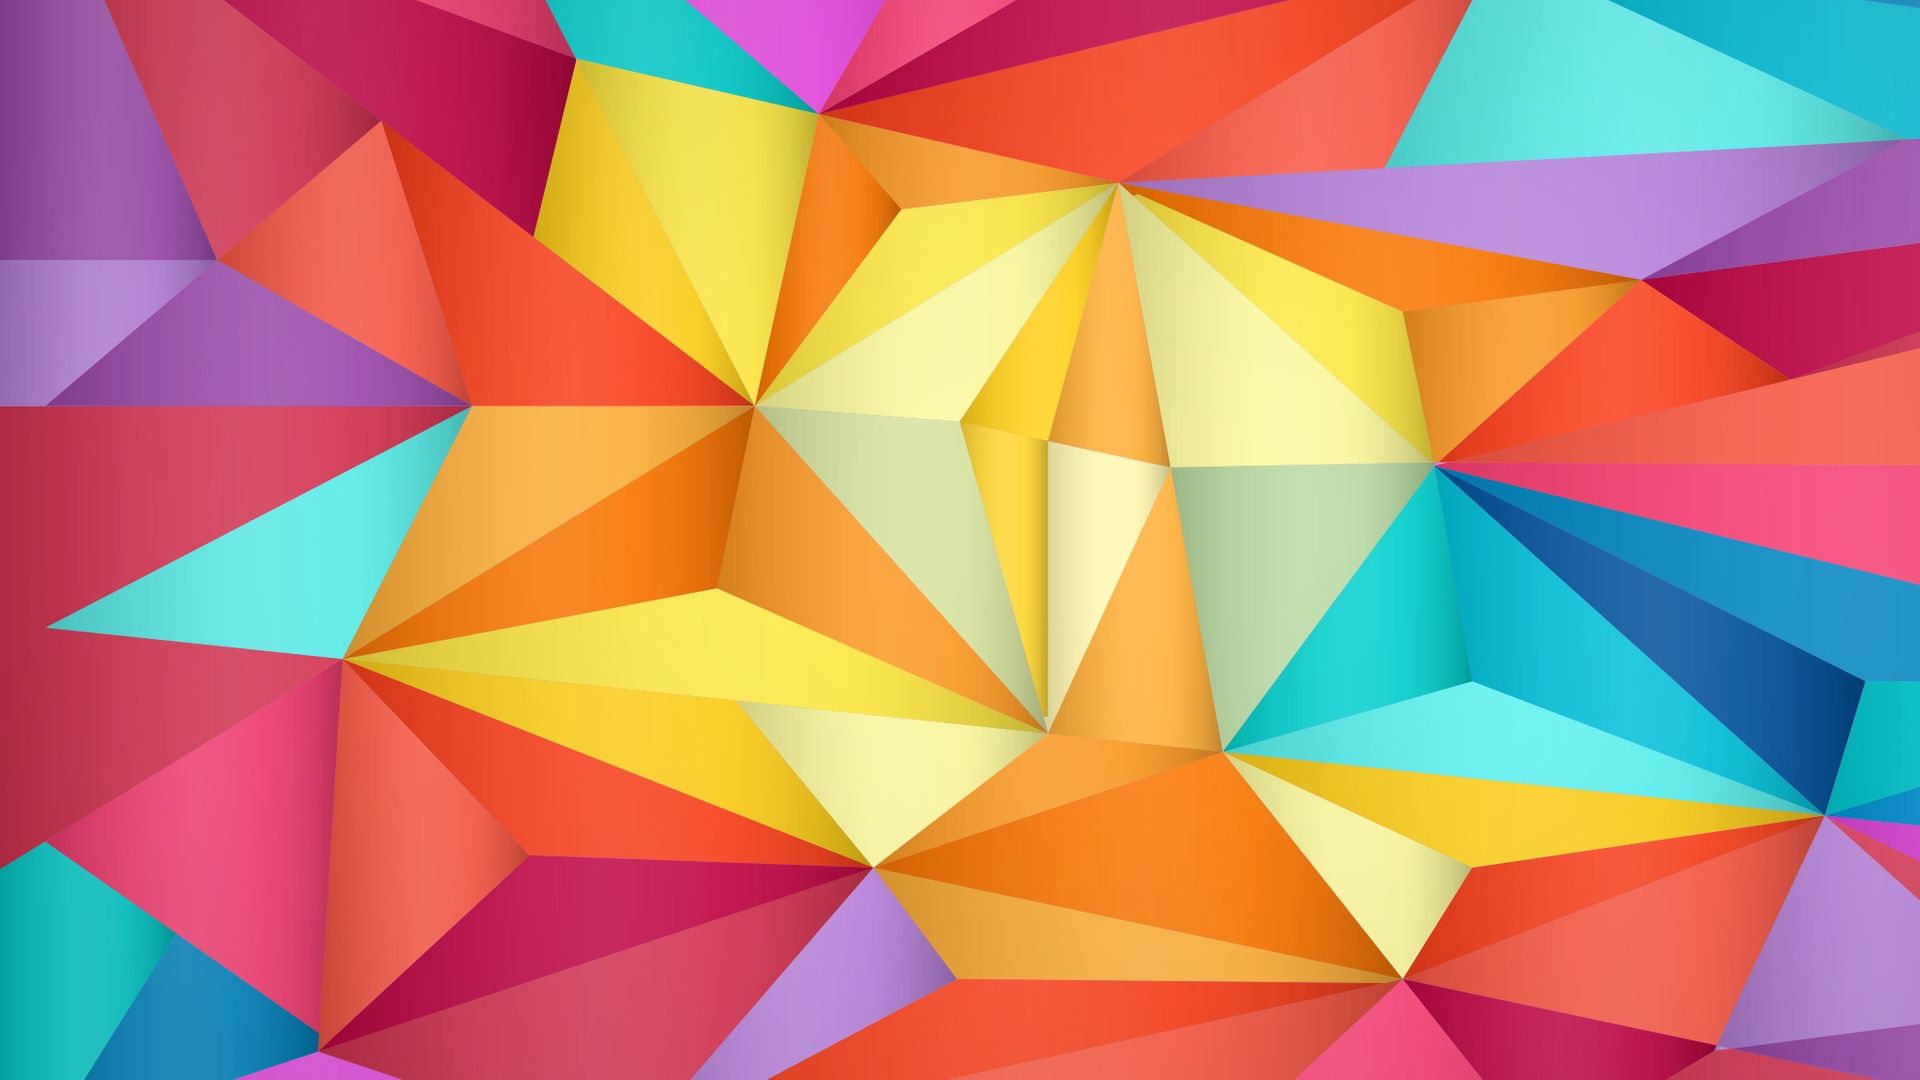 Abstract Colorful Triangles Background - Colorful Triangle - HD Wallpaper 